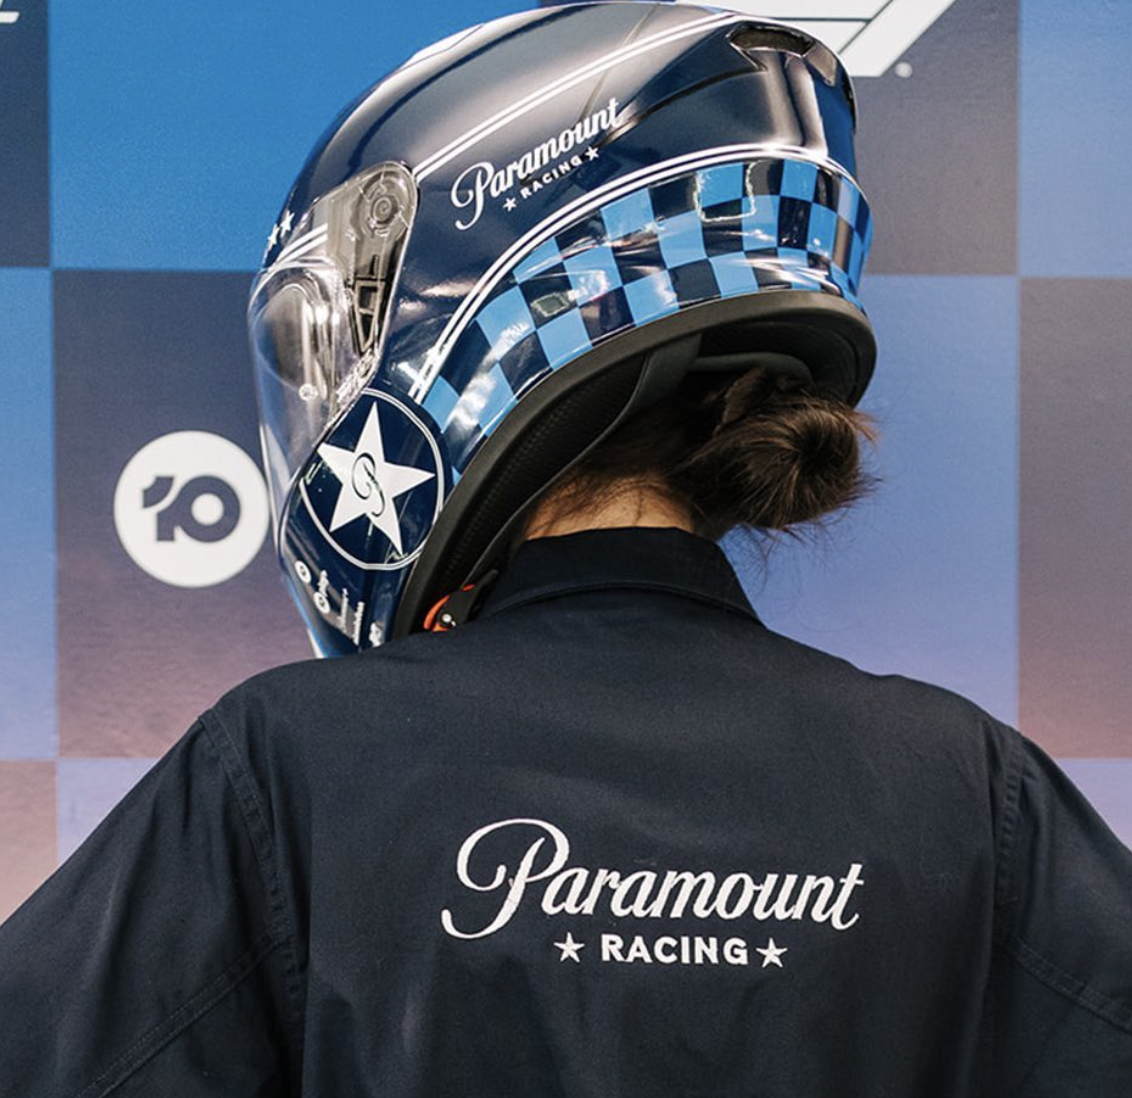 Paramount Racing Team Helmet Wraps completed in time for the @f1 Thanks to @thestyleco for the opportunity